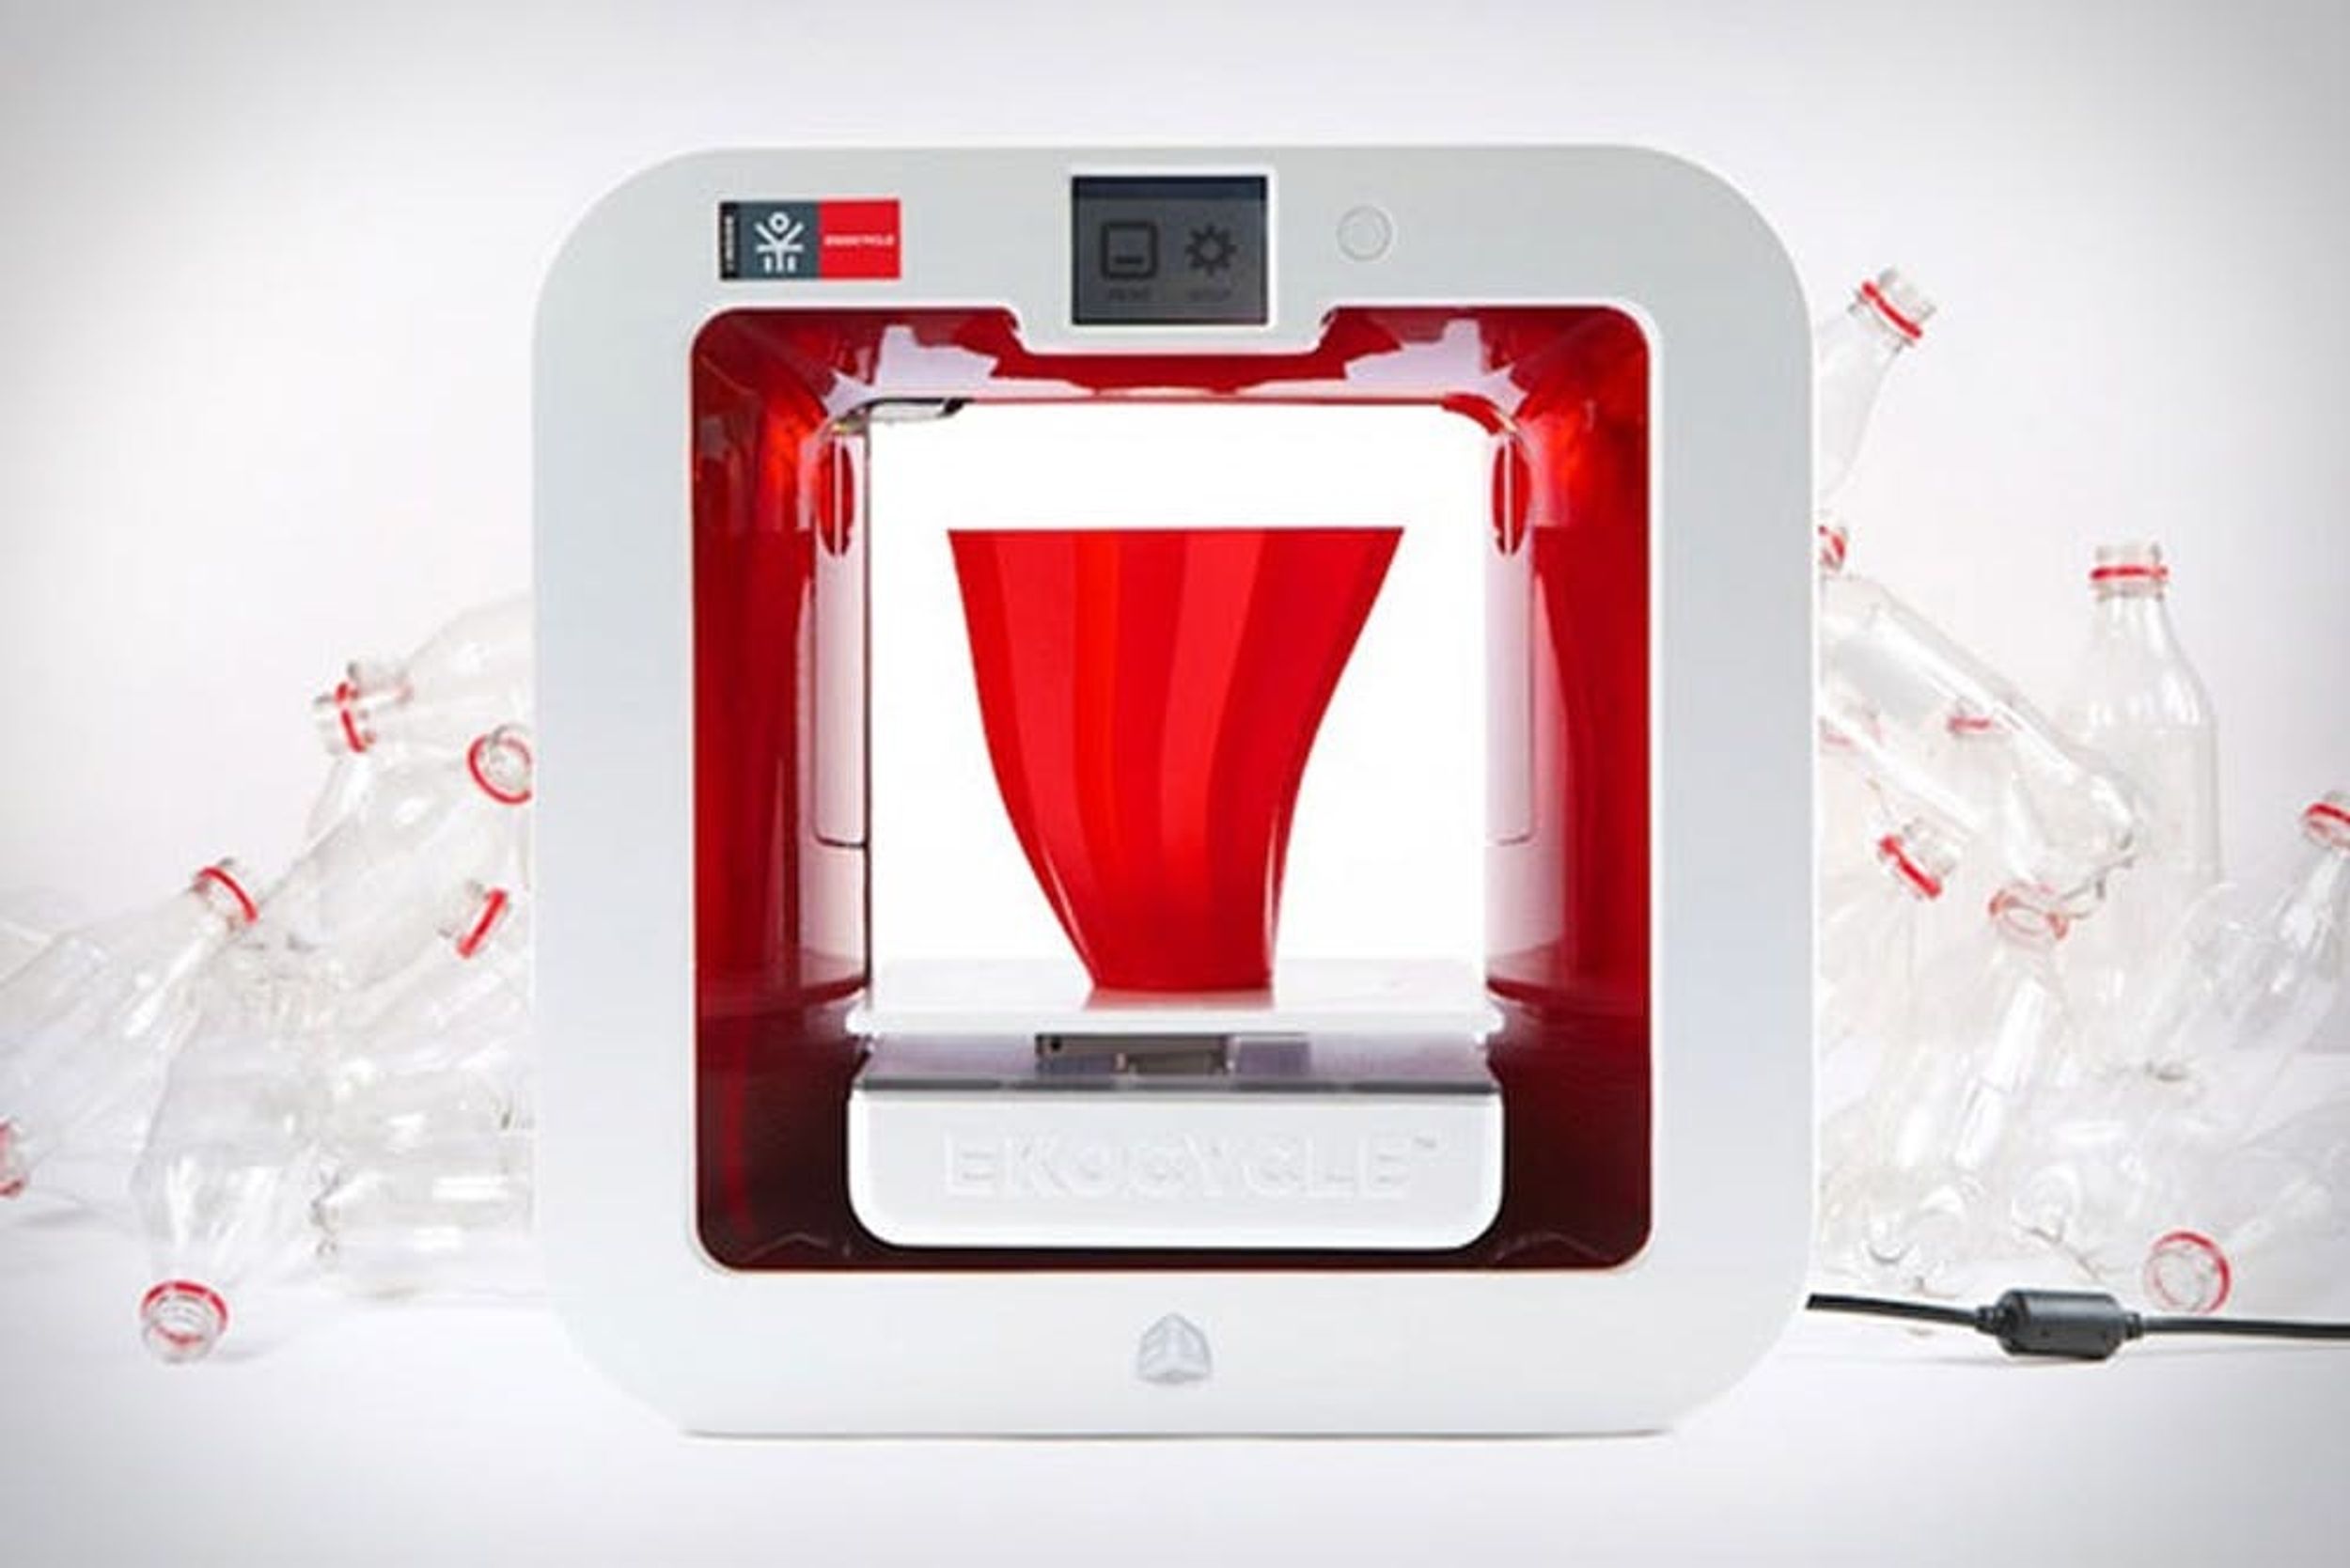 Will.i.am Created a 3D Printer That Lets You Print With Recycled Bottles